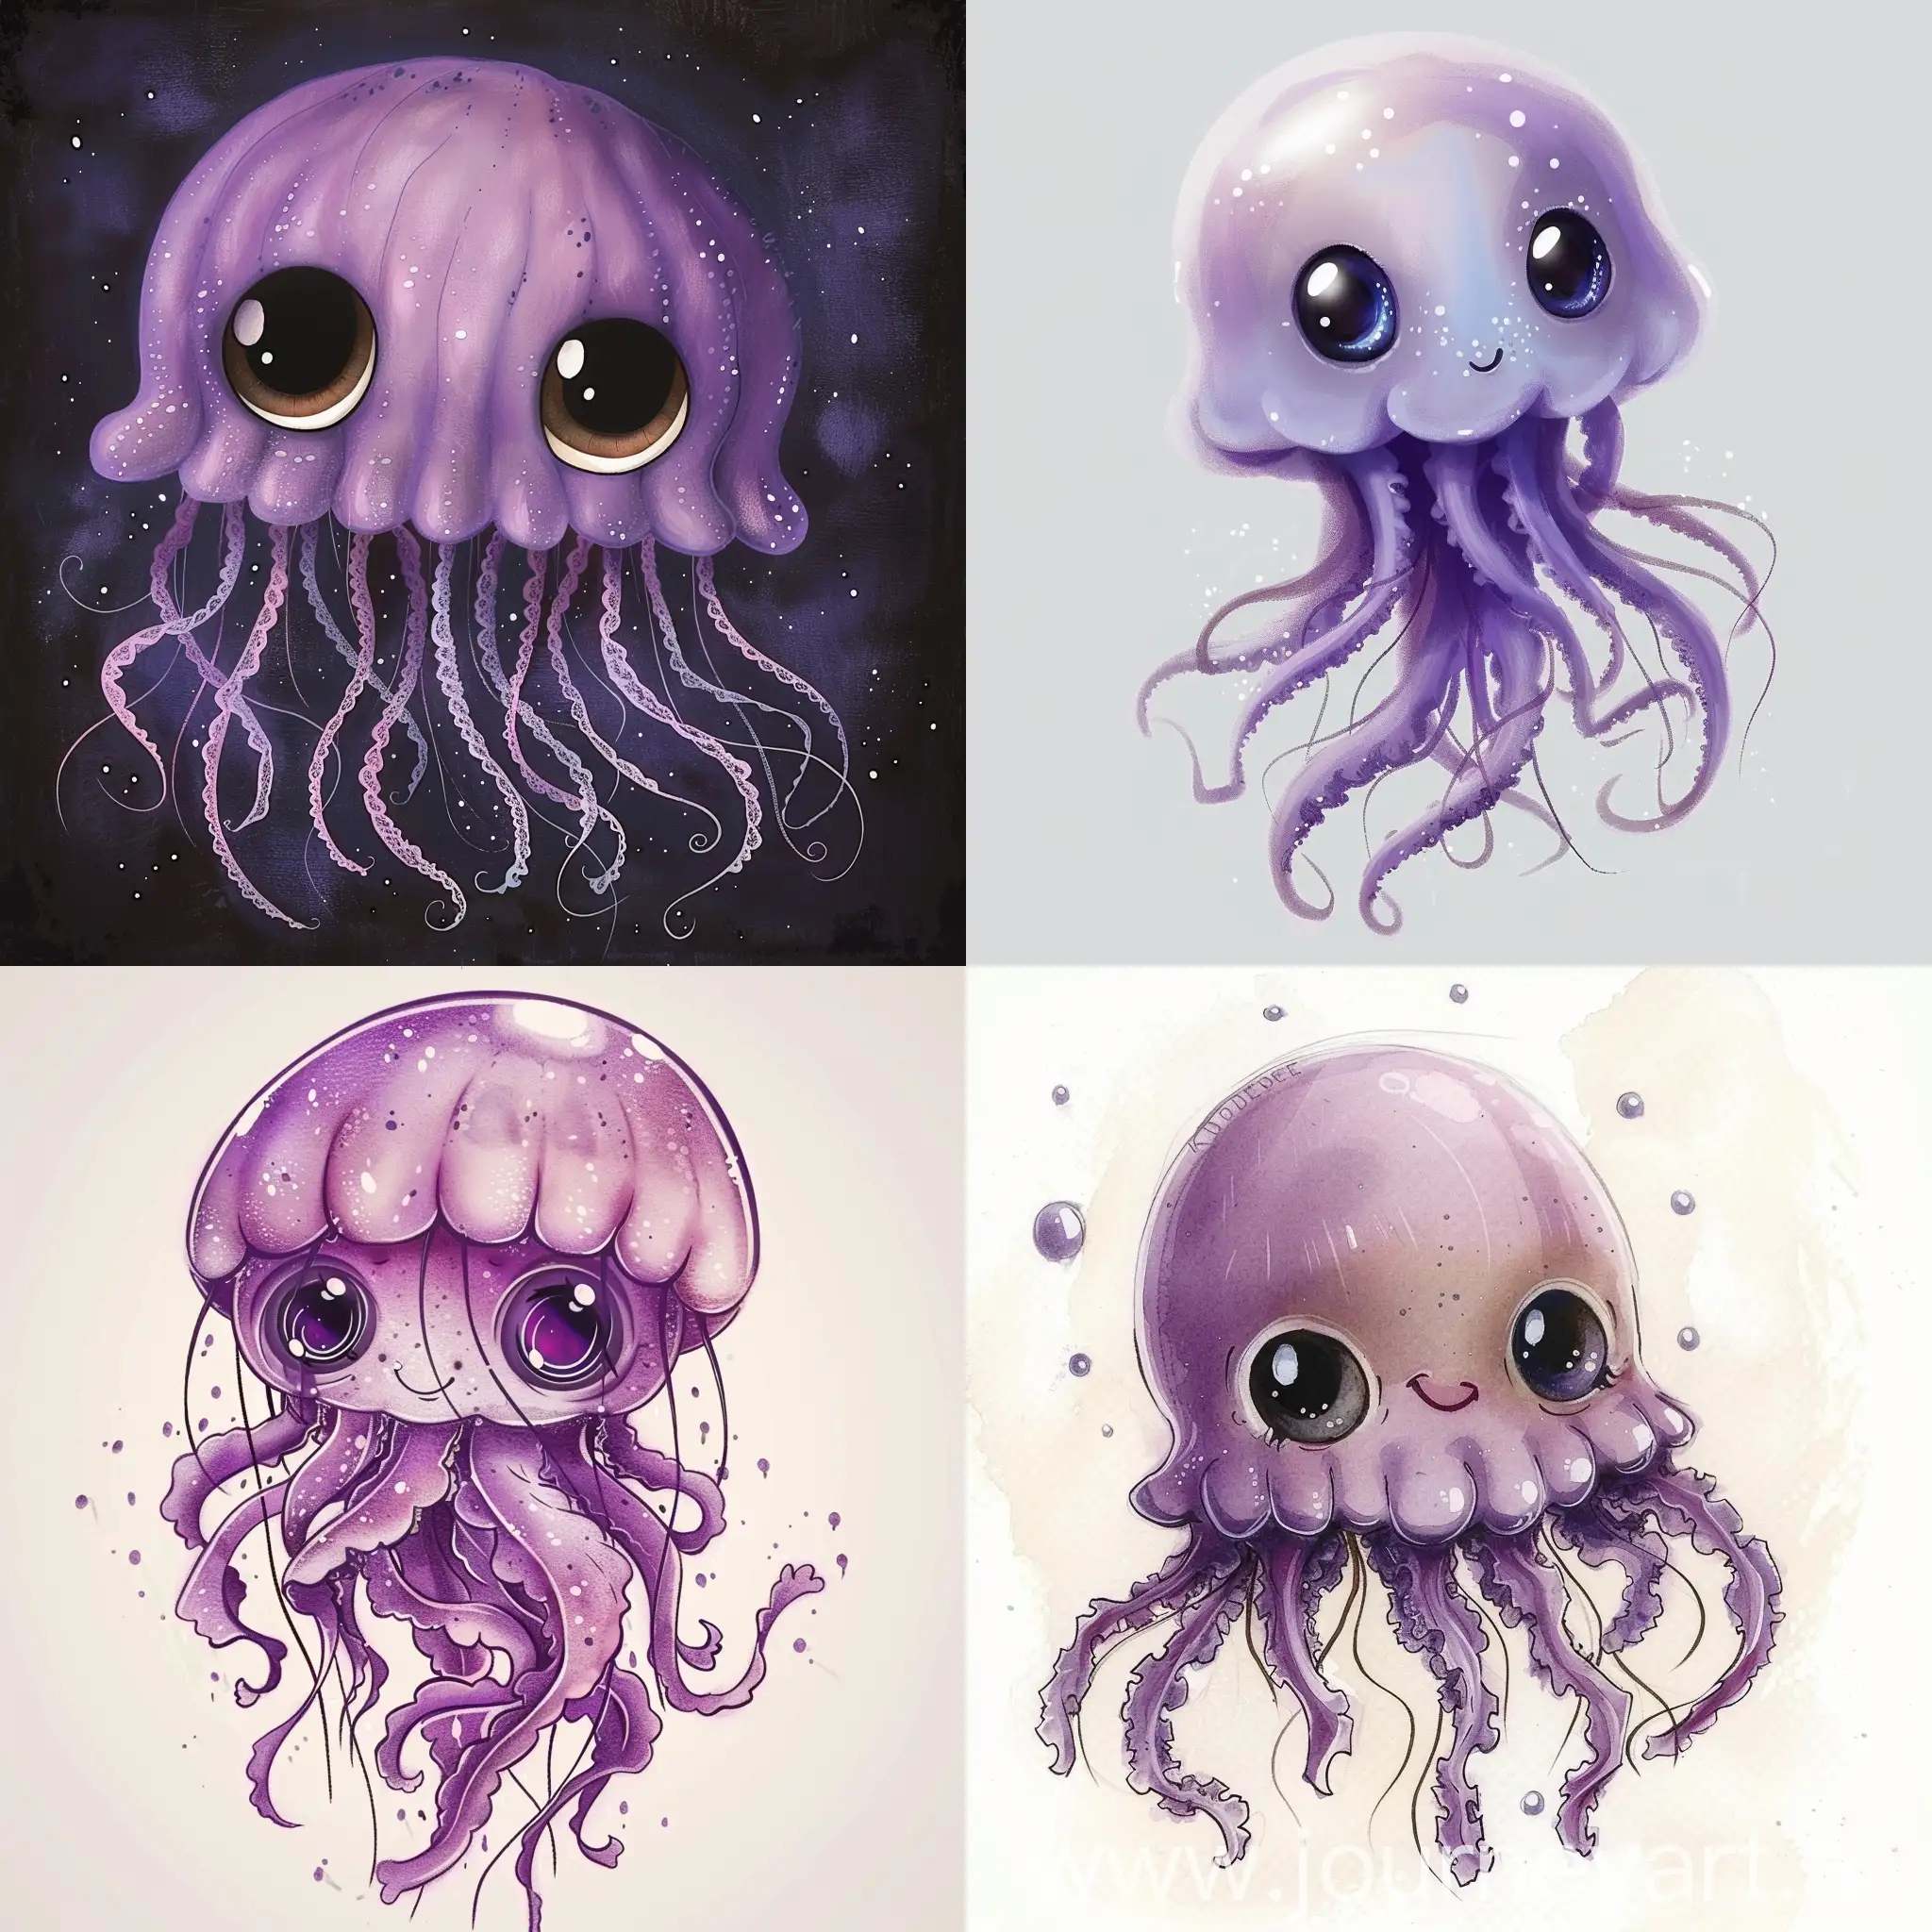 Adorable-Purple-Jellyfish-with-Big-Eyes-Cute-Drawing-Style-Art